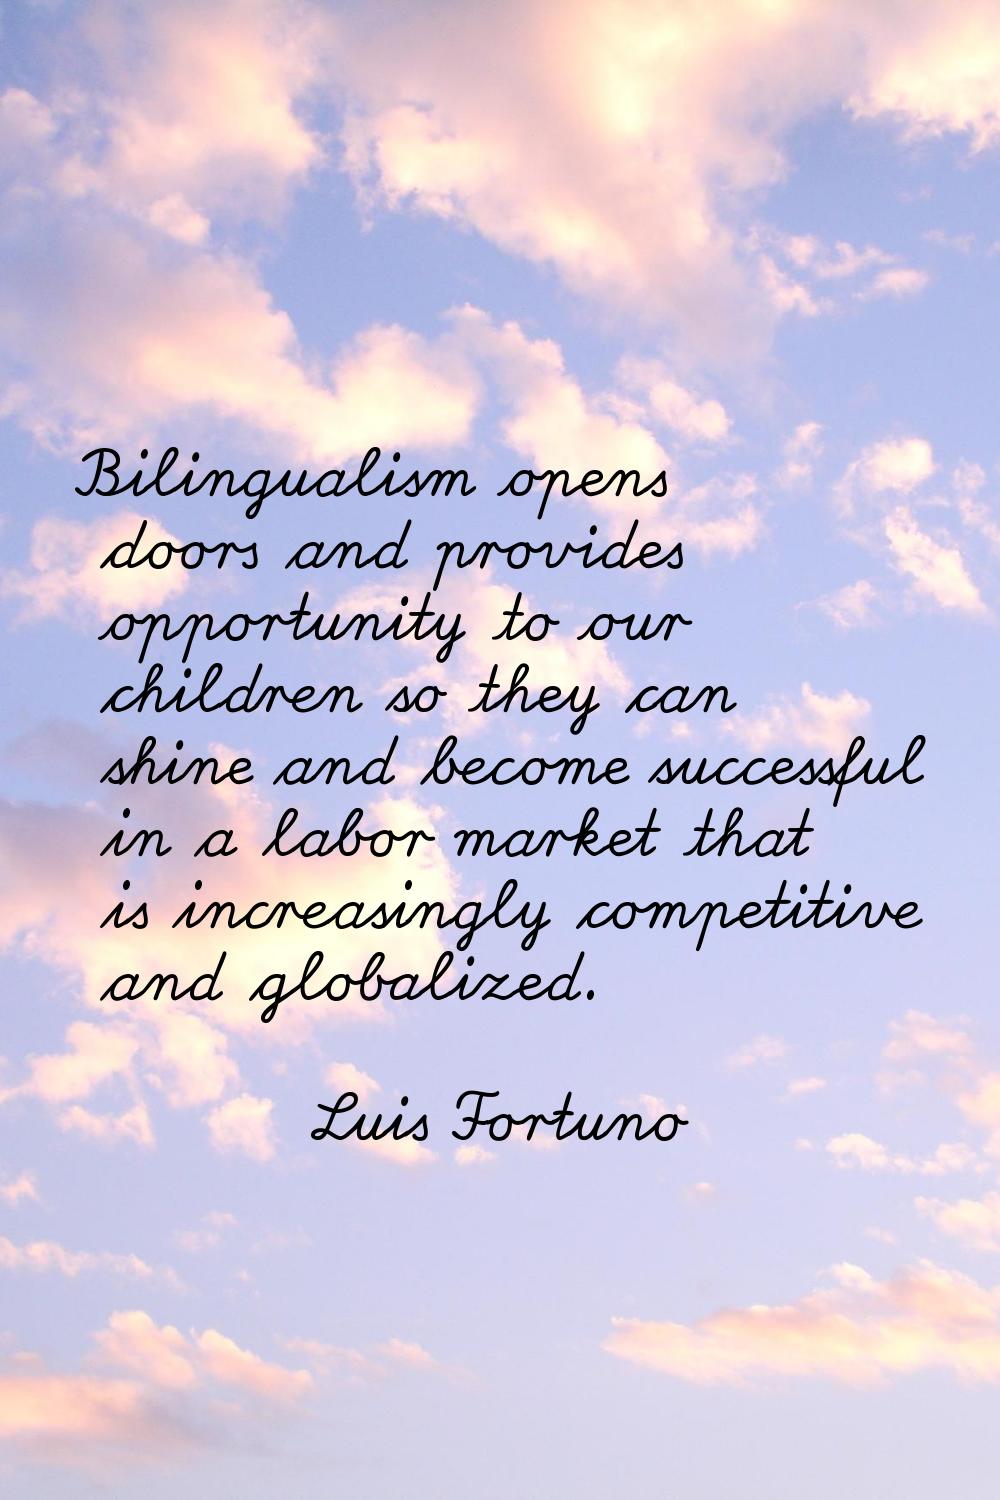 Bilingualism opens doors and provides opportunity to our children so they can shine and become succ